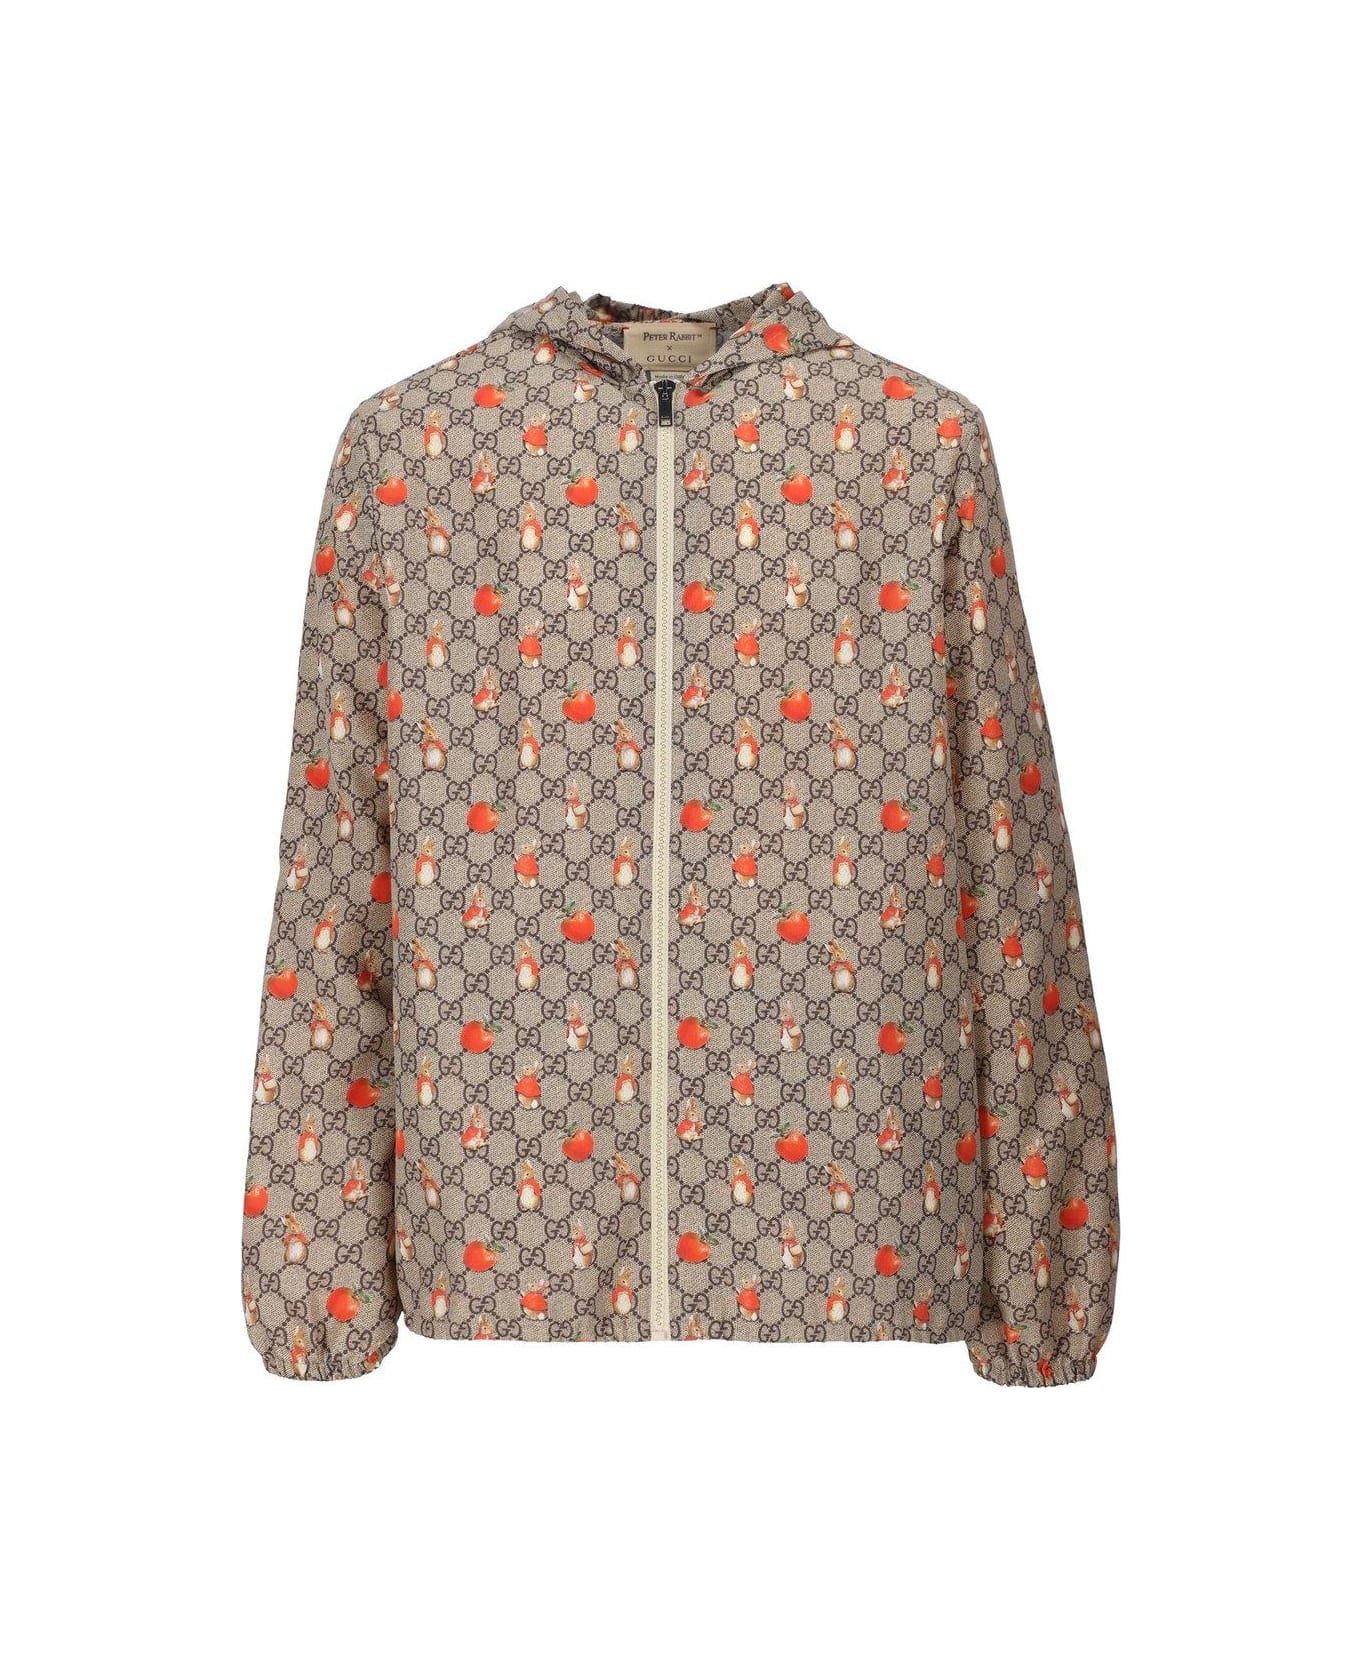 Gucci Allover Printed Hooded Jacket - Beige